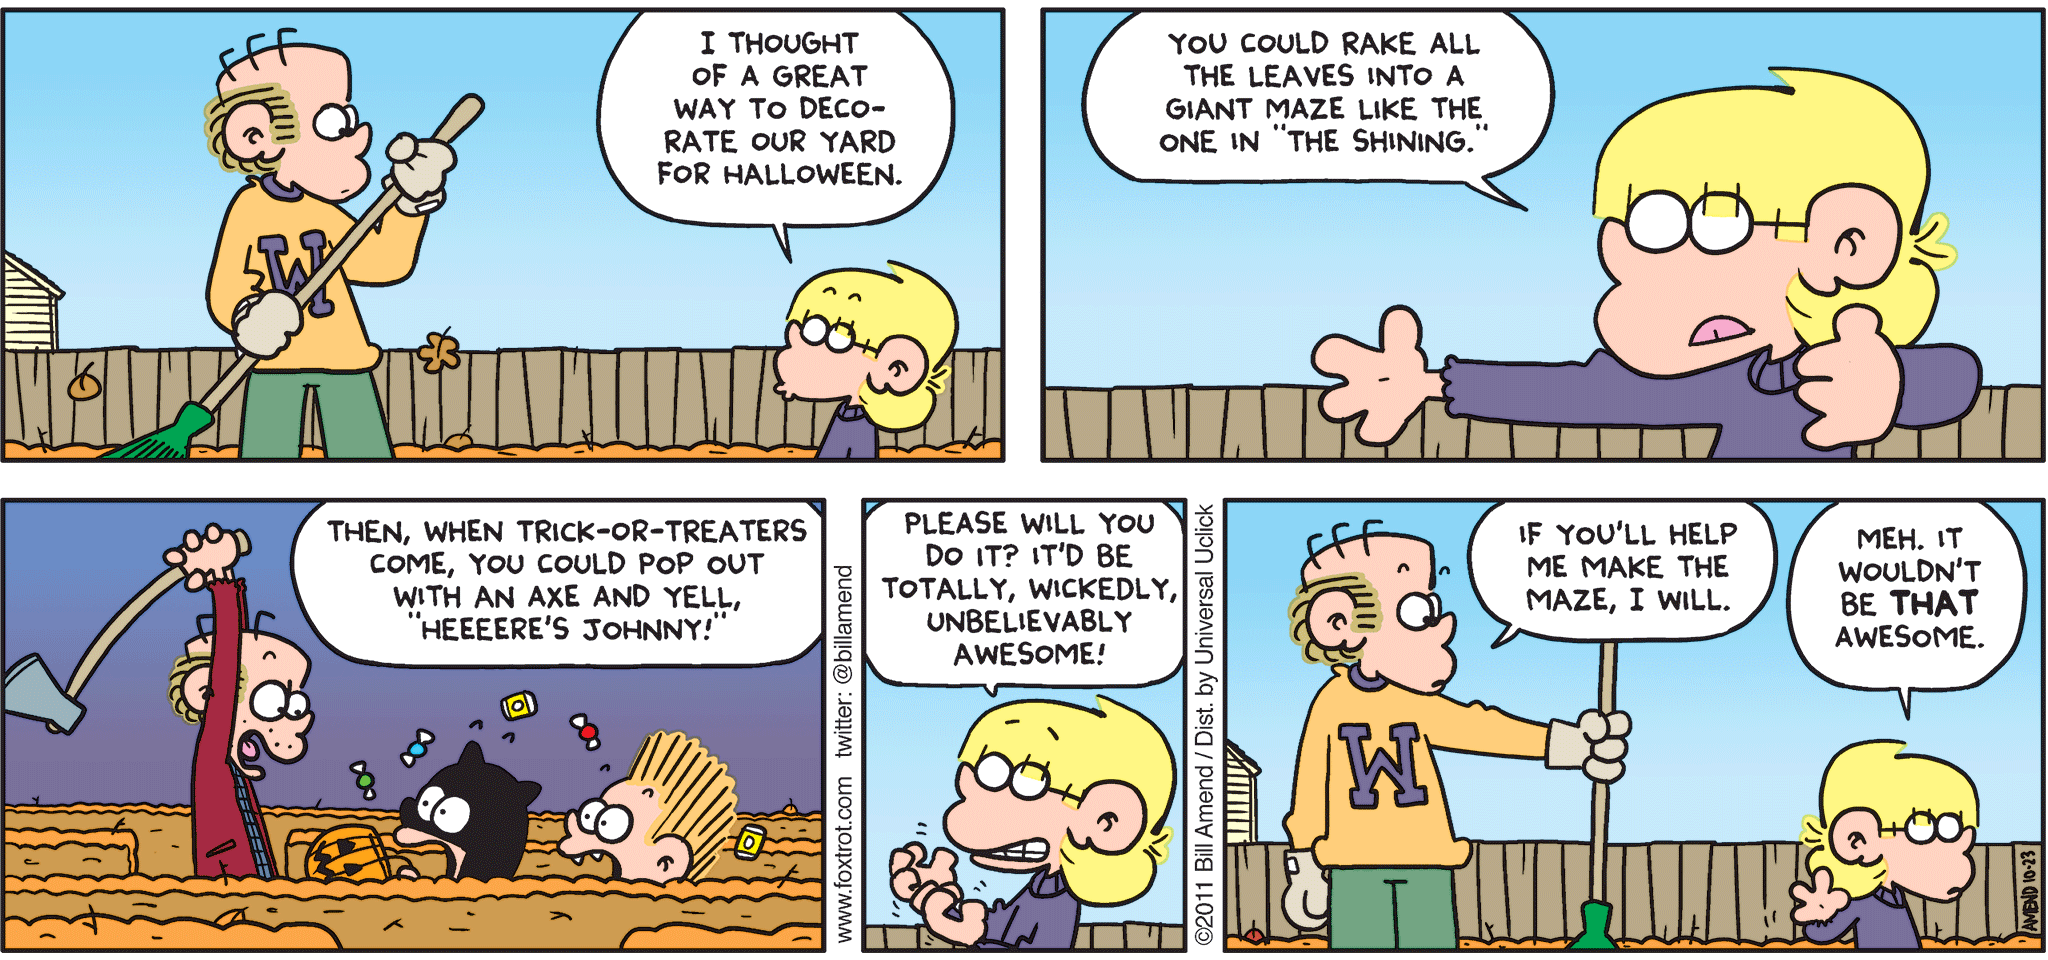 FoxTrot comic strip by Bill Amend - "Shining Moment" published October 23, 2011 - Jason: I thought of a great way to decorate our yard for halloween. You could rake all the leaves into a giant maze like the one in "The Shining." Then, when trick-or-treaters come, you could pop out with an axe and yell, "heeeere's Johnny!" Please will you do it? It'd be totally, wickedly, unbelievably awesome! Roger: If you'll help me make the maze, I will. Jason: Meh. It wouldn't be THAT awesome.